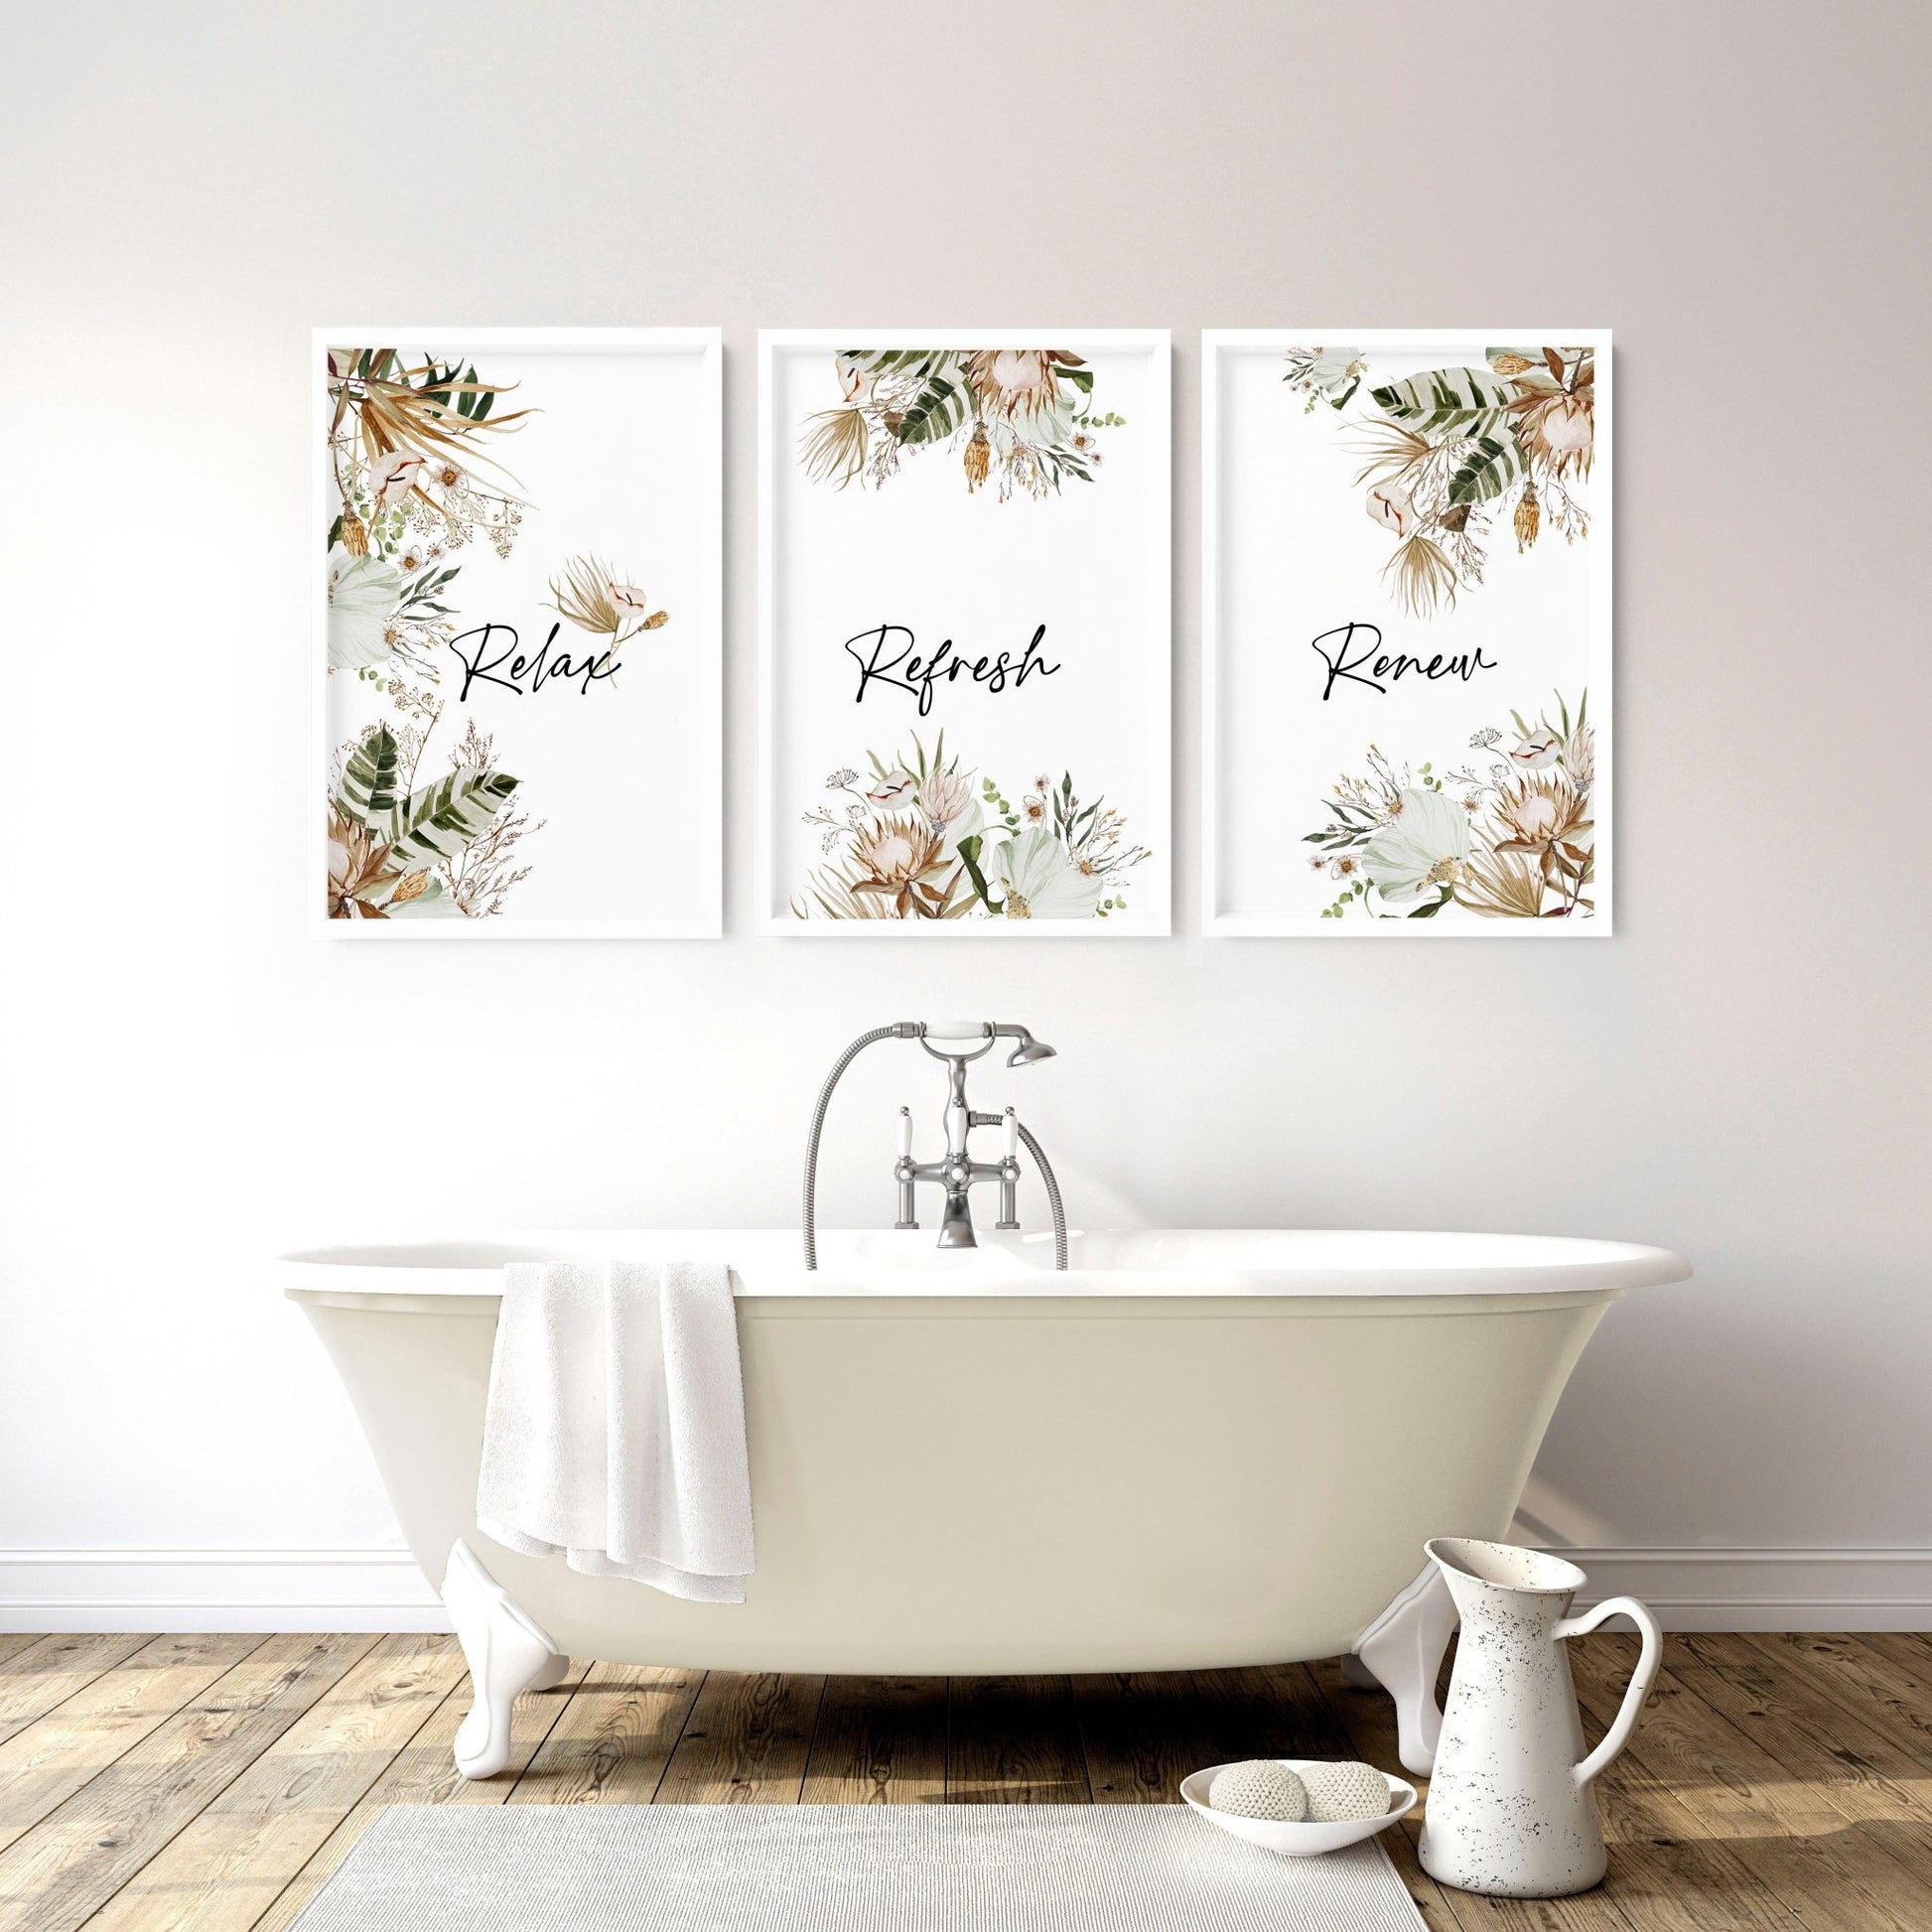 Prints for bathroom walls | set of 3 wall art - About Wall Art